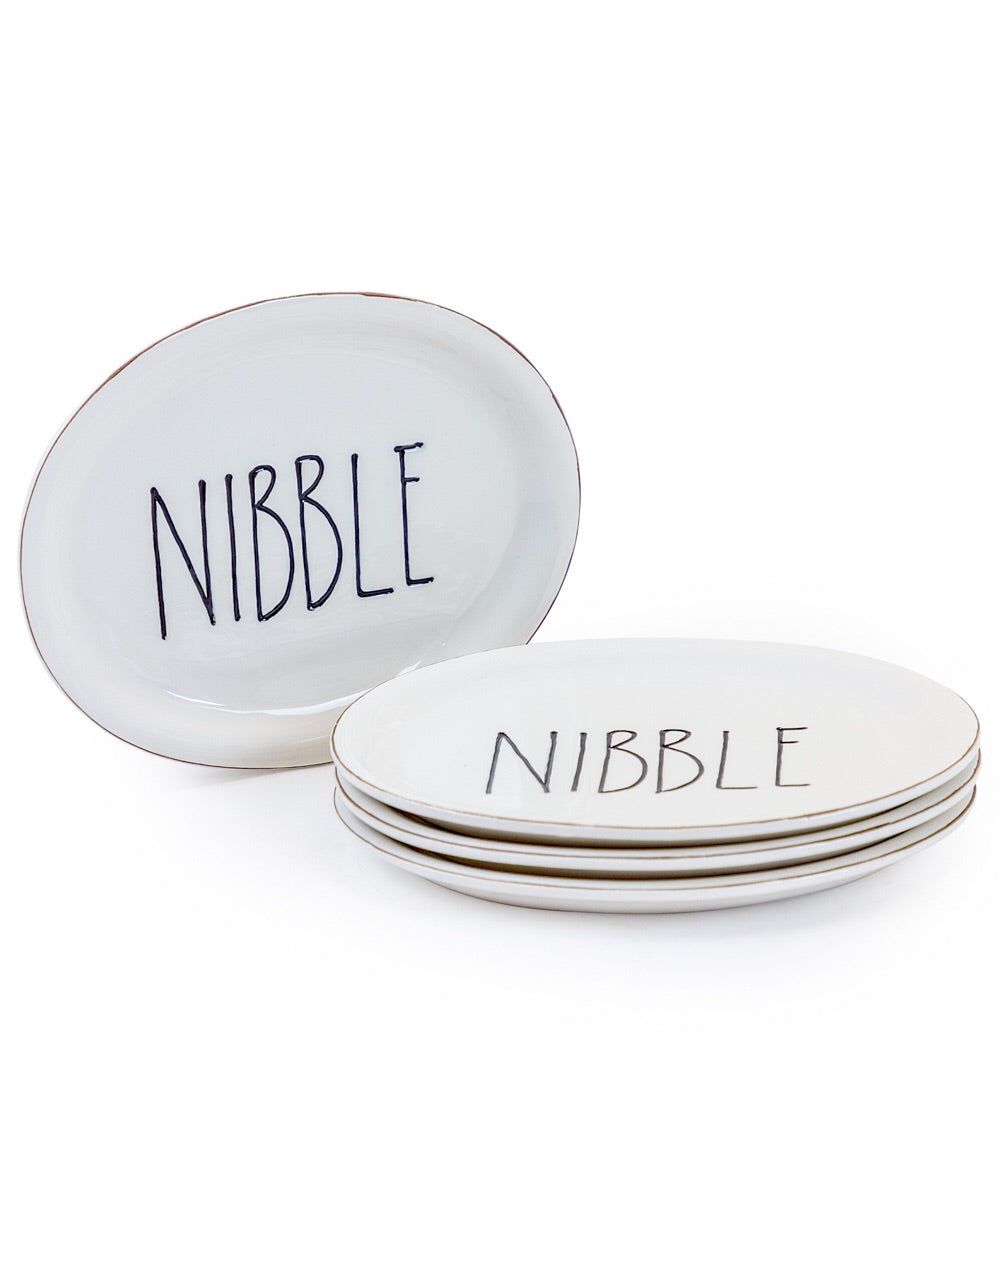 Oval ceramic nibble plate